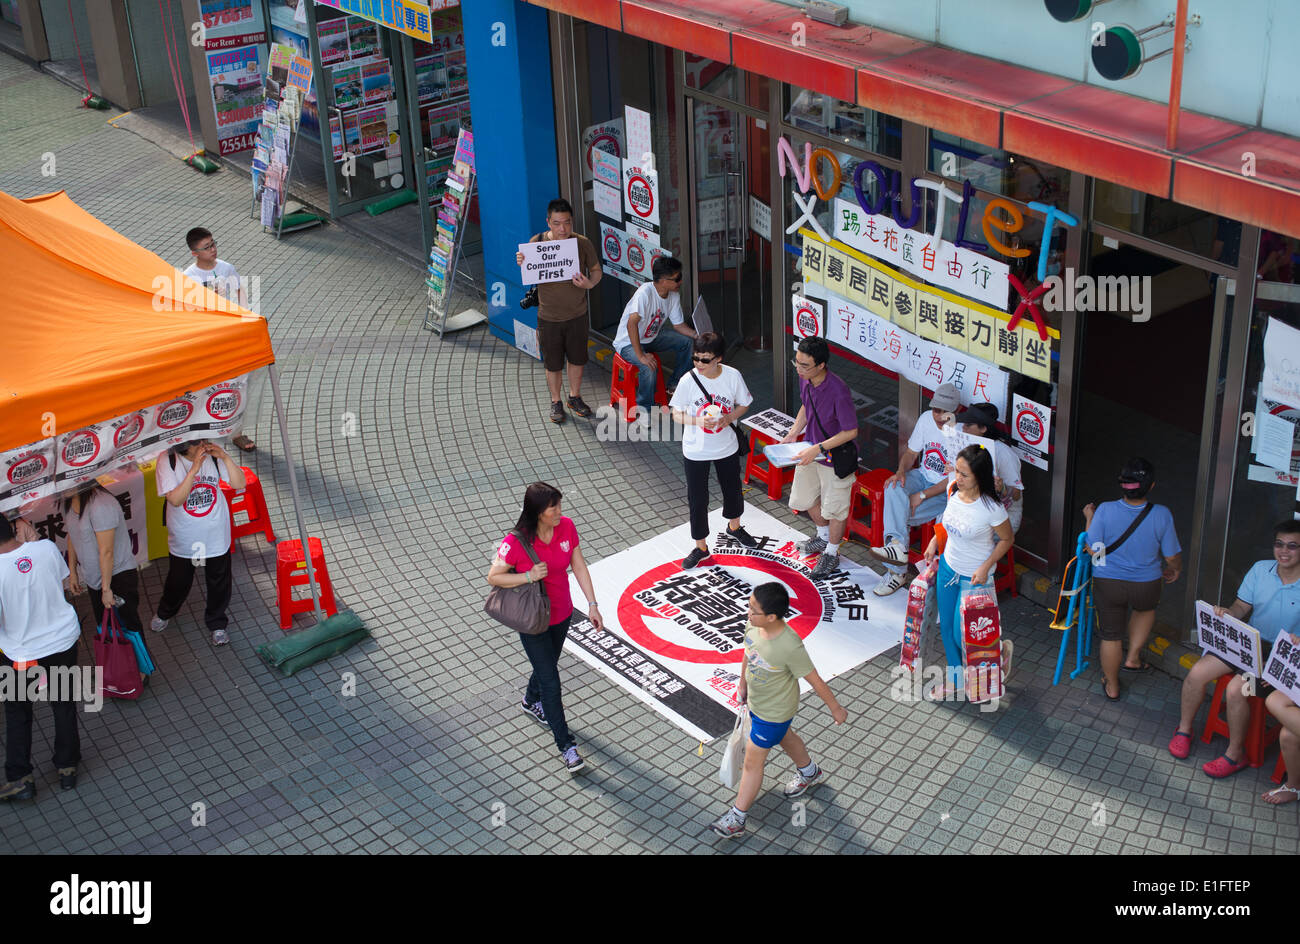 Local protest over landlords wanting to open outlet stores in Ap Lei Chau Stock Photo